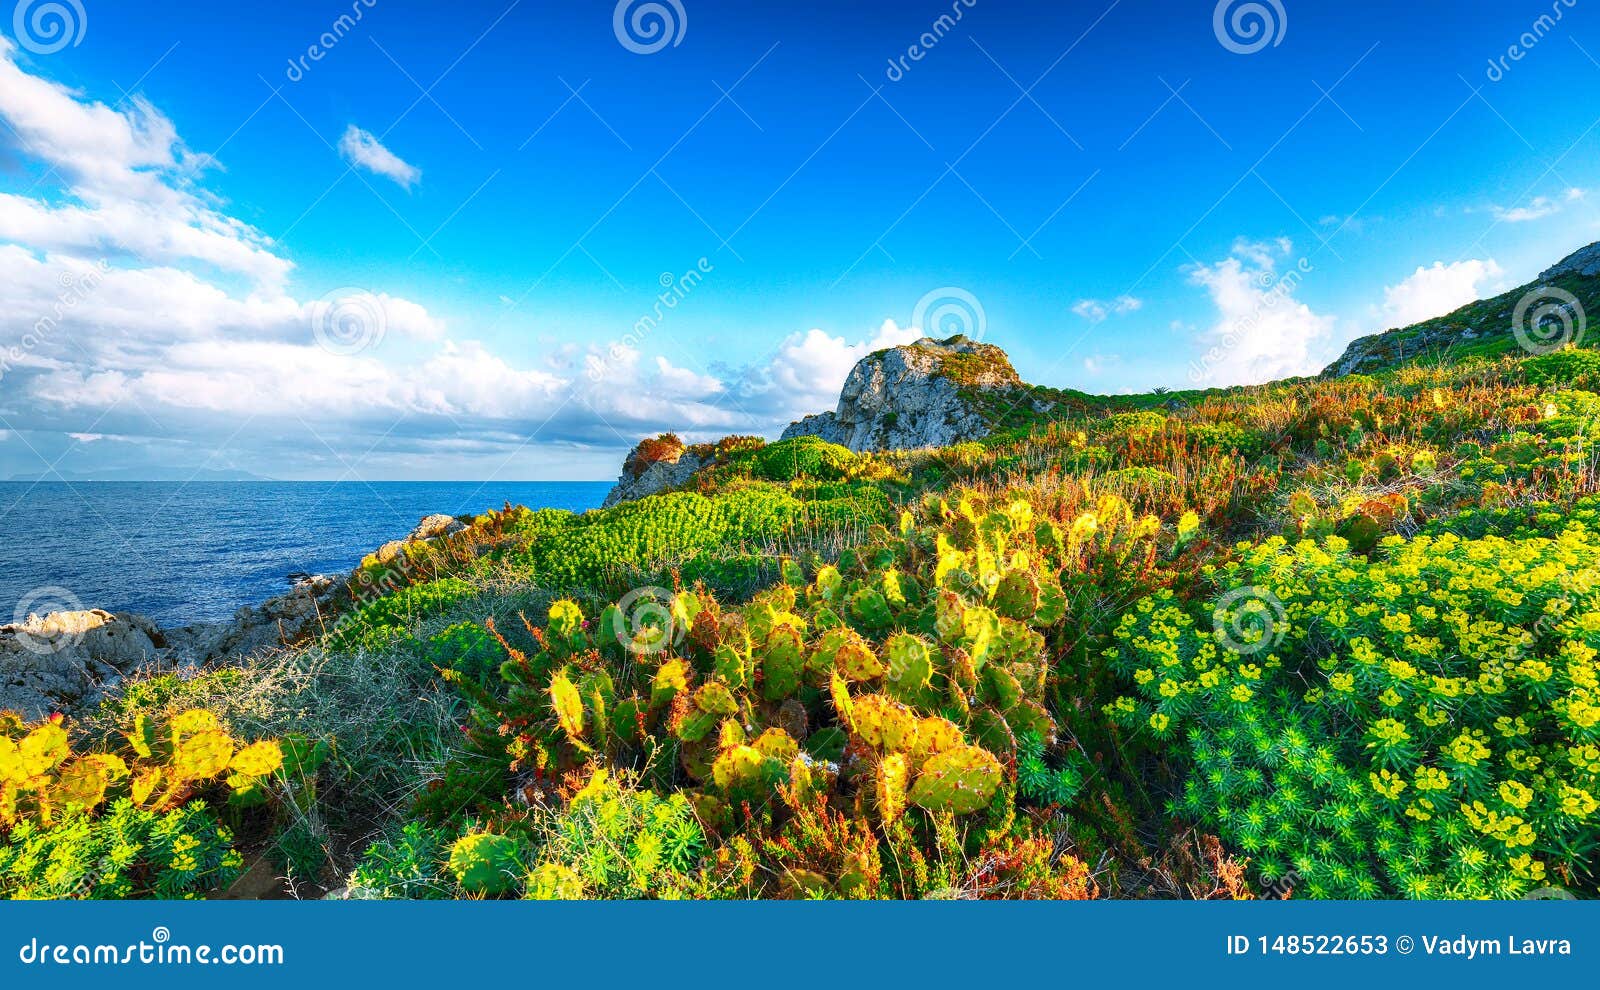 Dramatic Spring Sunset On The The Cape Milazzo Panorama Of